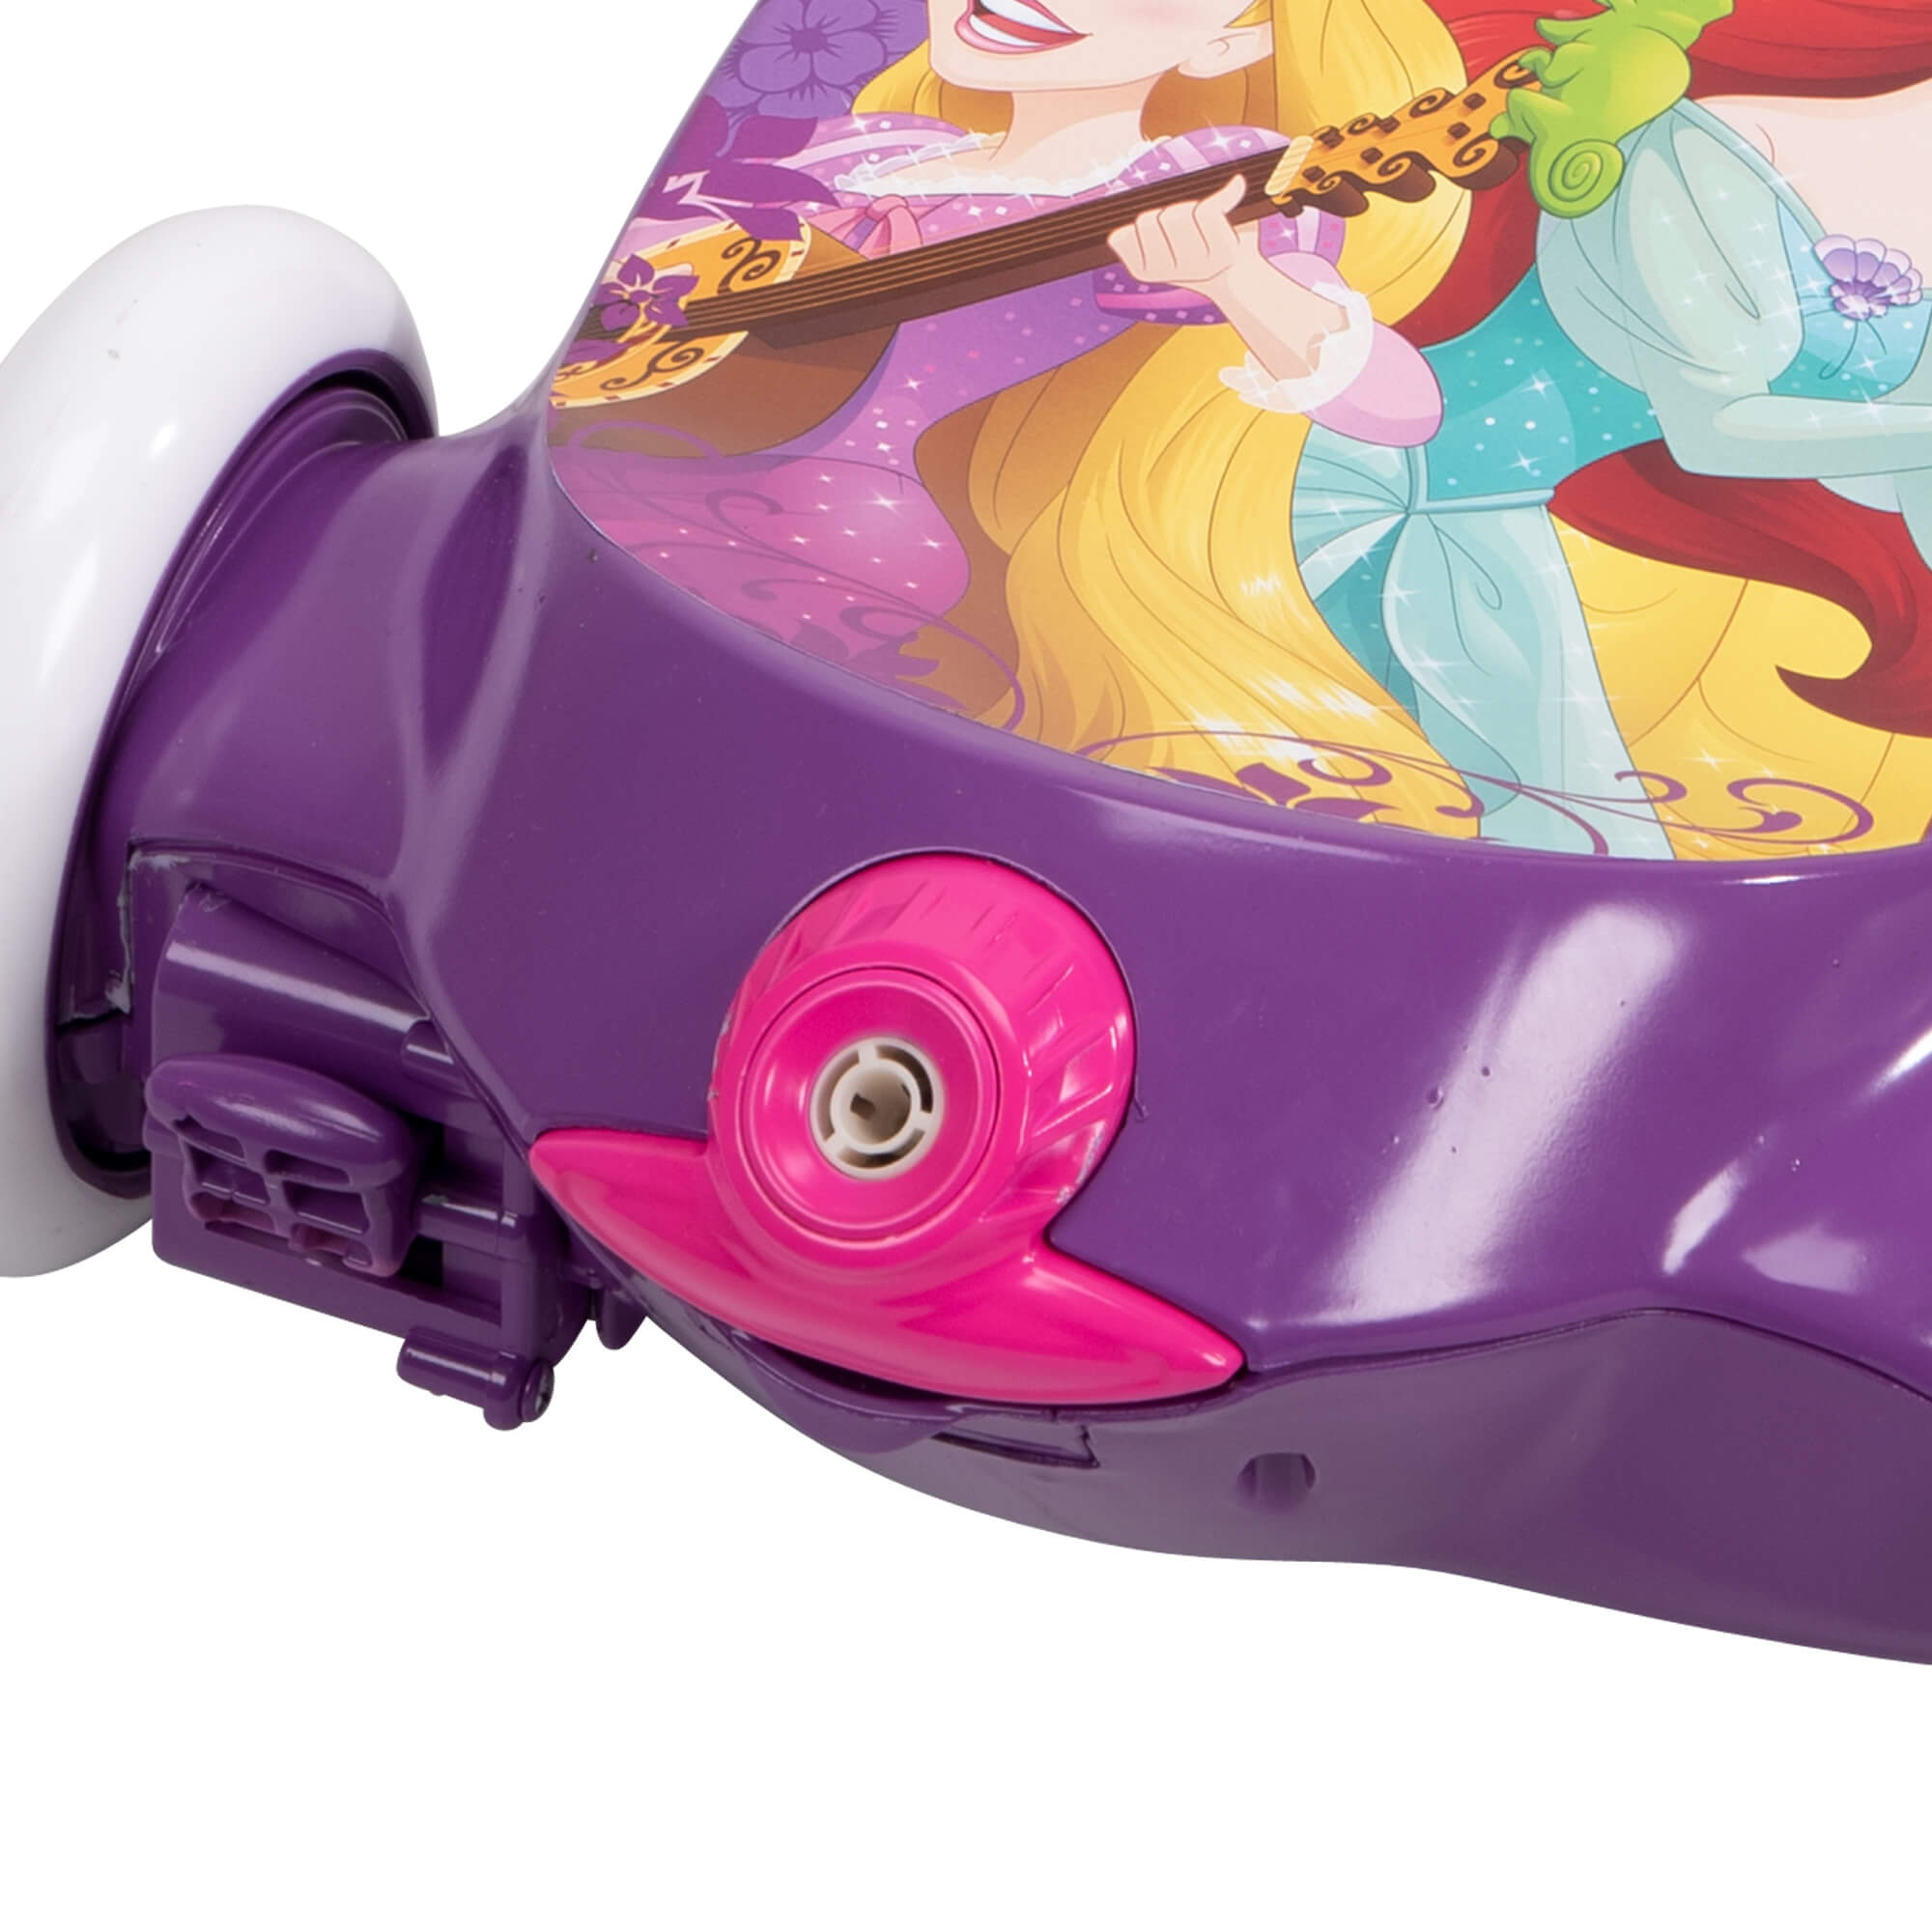 Disney Princess 6V 3-Wheel Electric Ride-On Bubble Scooter for Kids' - image 4 of 8